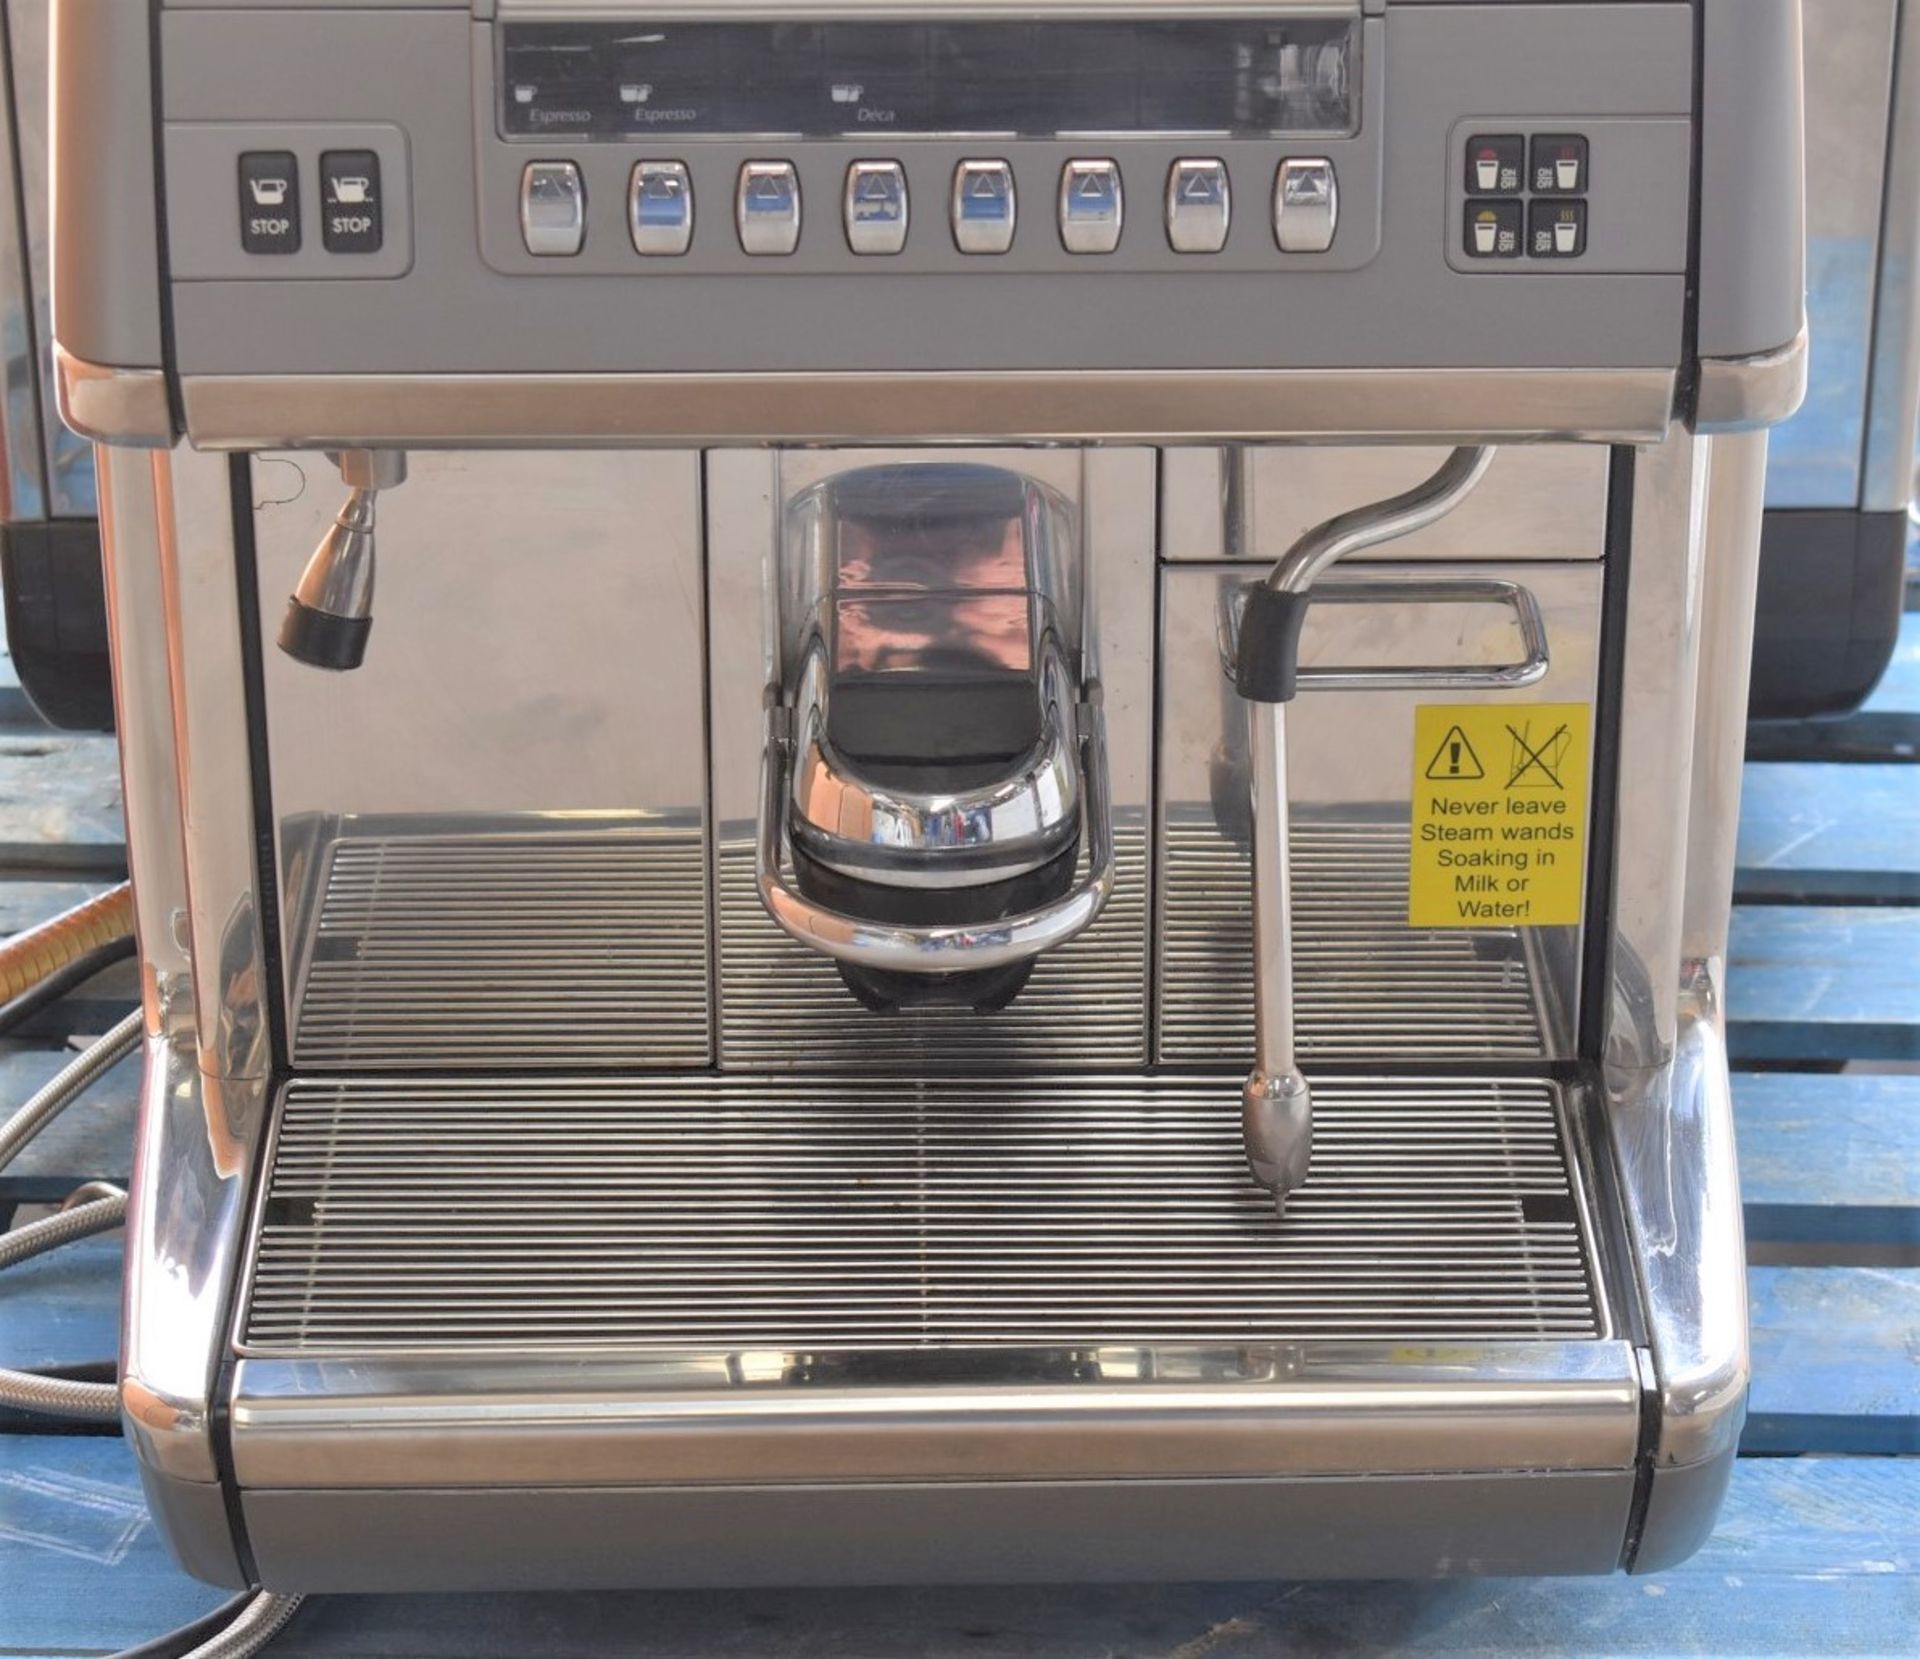 1 x La Cimbali S39 TE Combined Automatic Bean to Cup Coffee Machine - 2017 Model - RRP £10,245 - Image 20 of 22